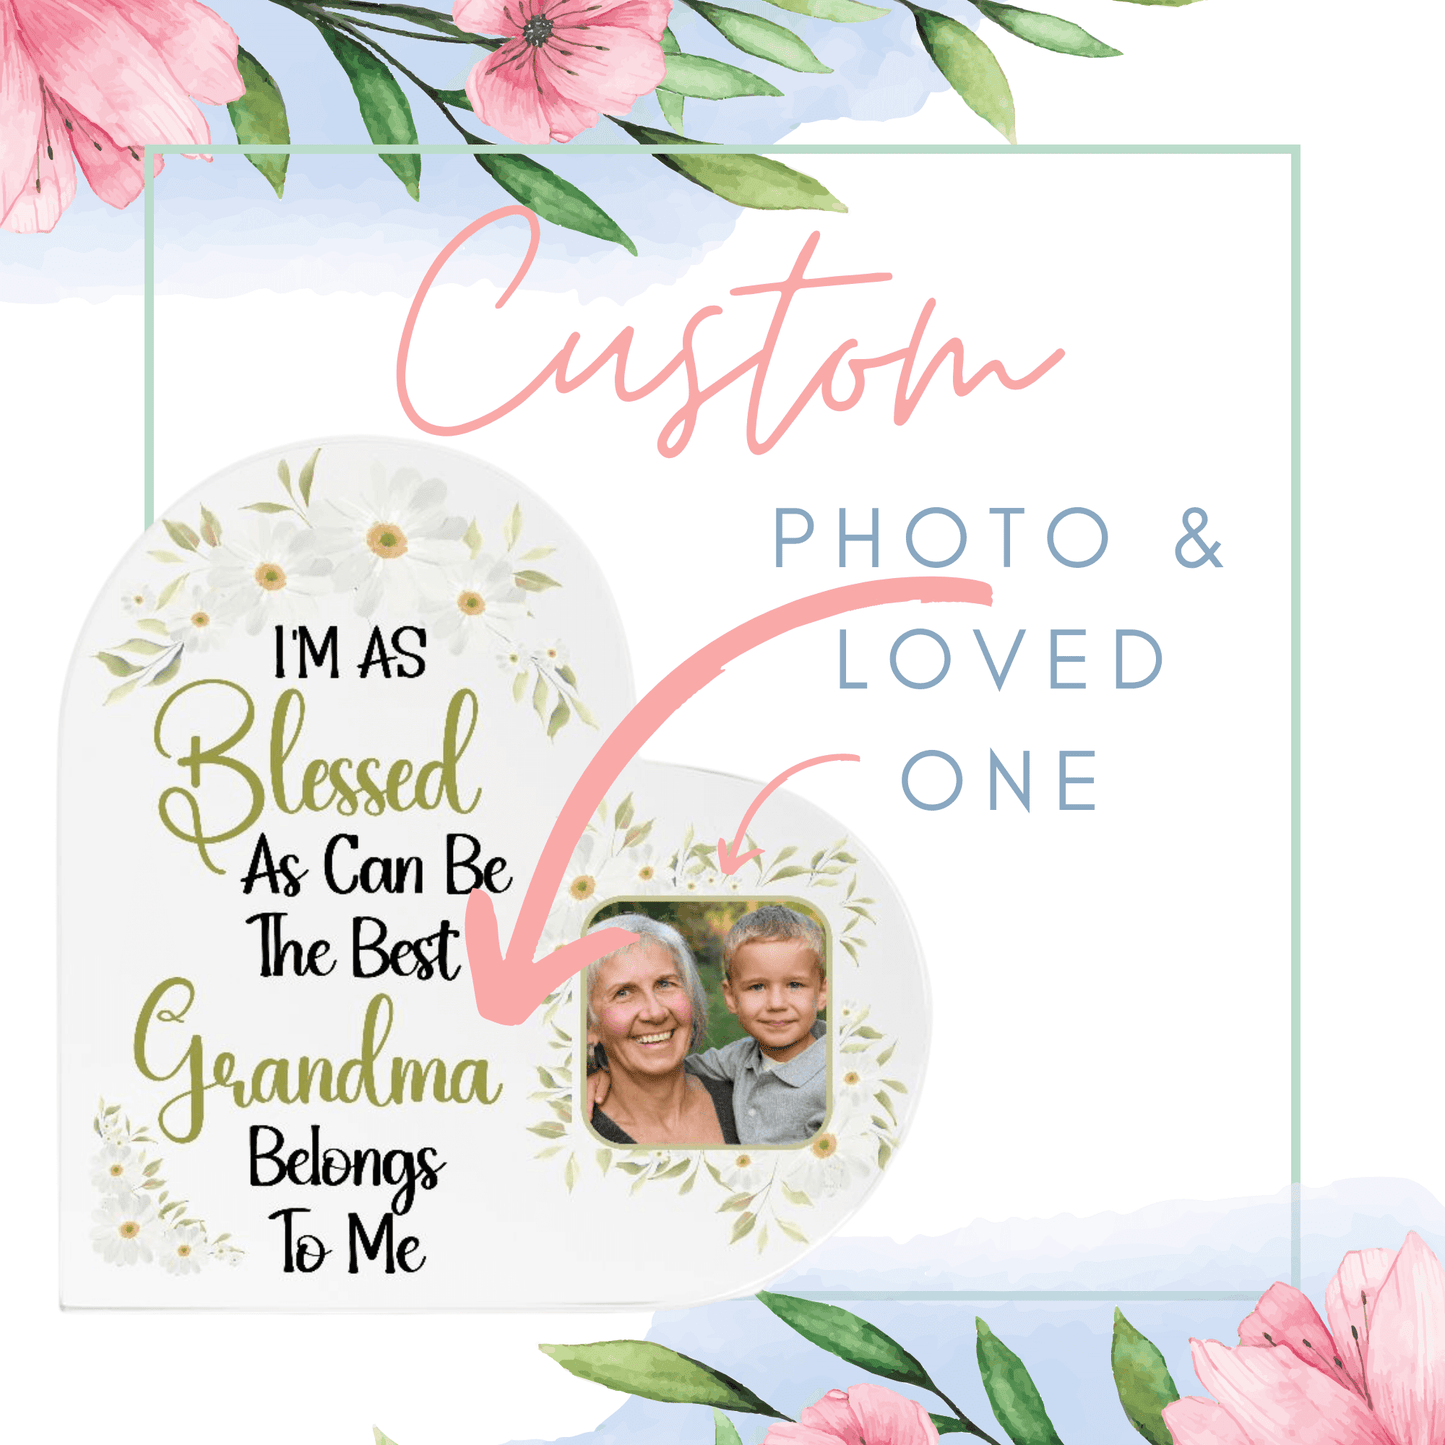 Personalize Your Acrylic Heart Photo Plaque For Any Loved One - I'm as Blessed As Can Be